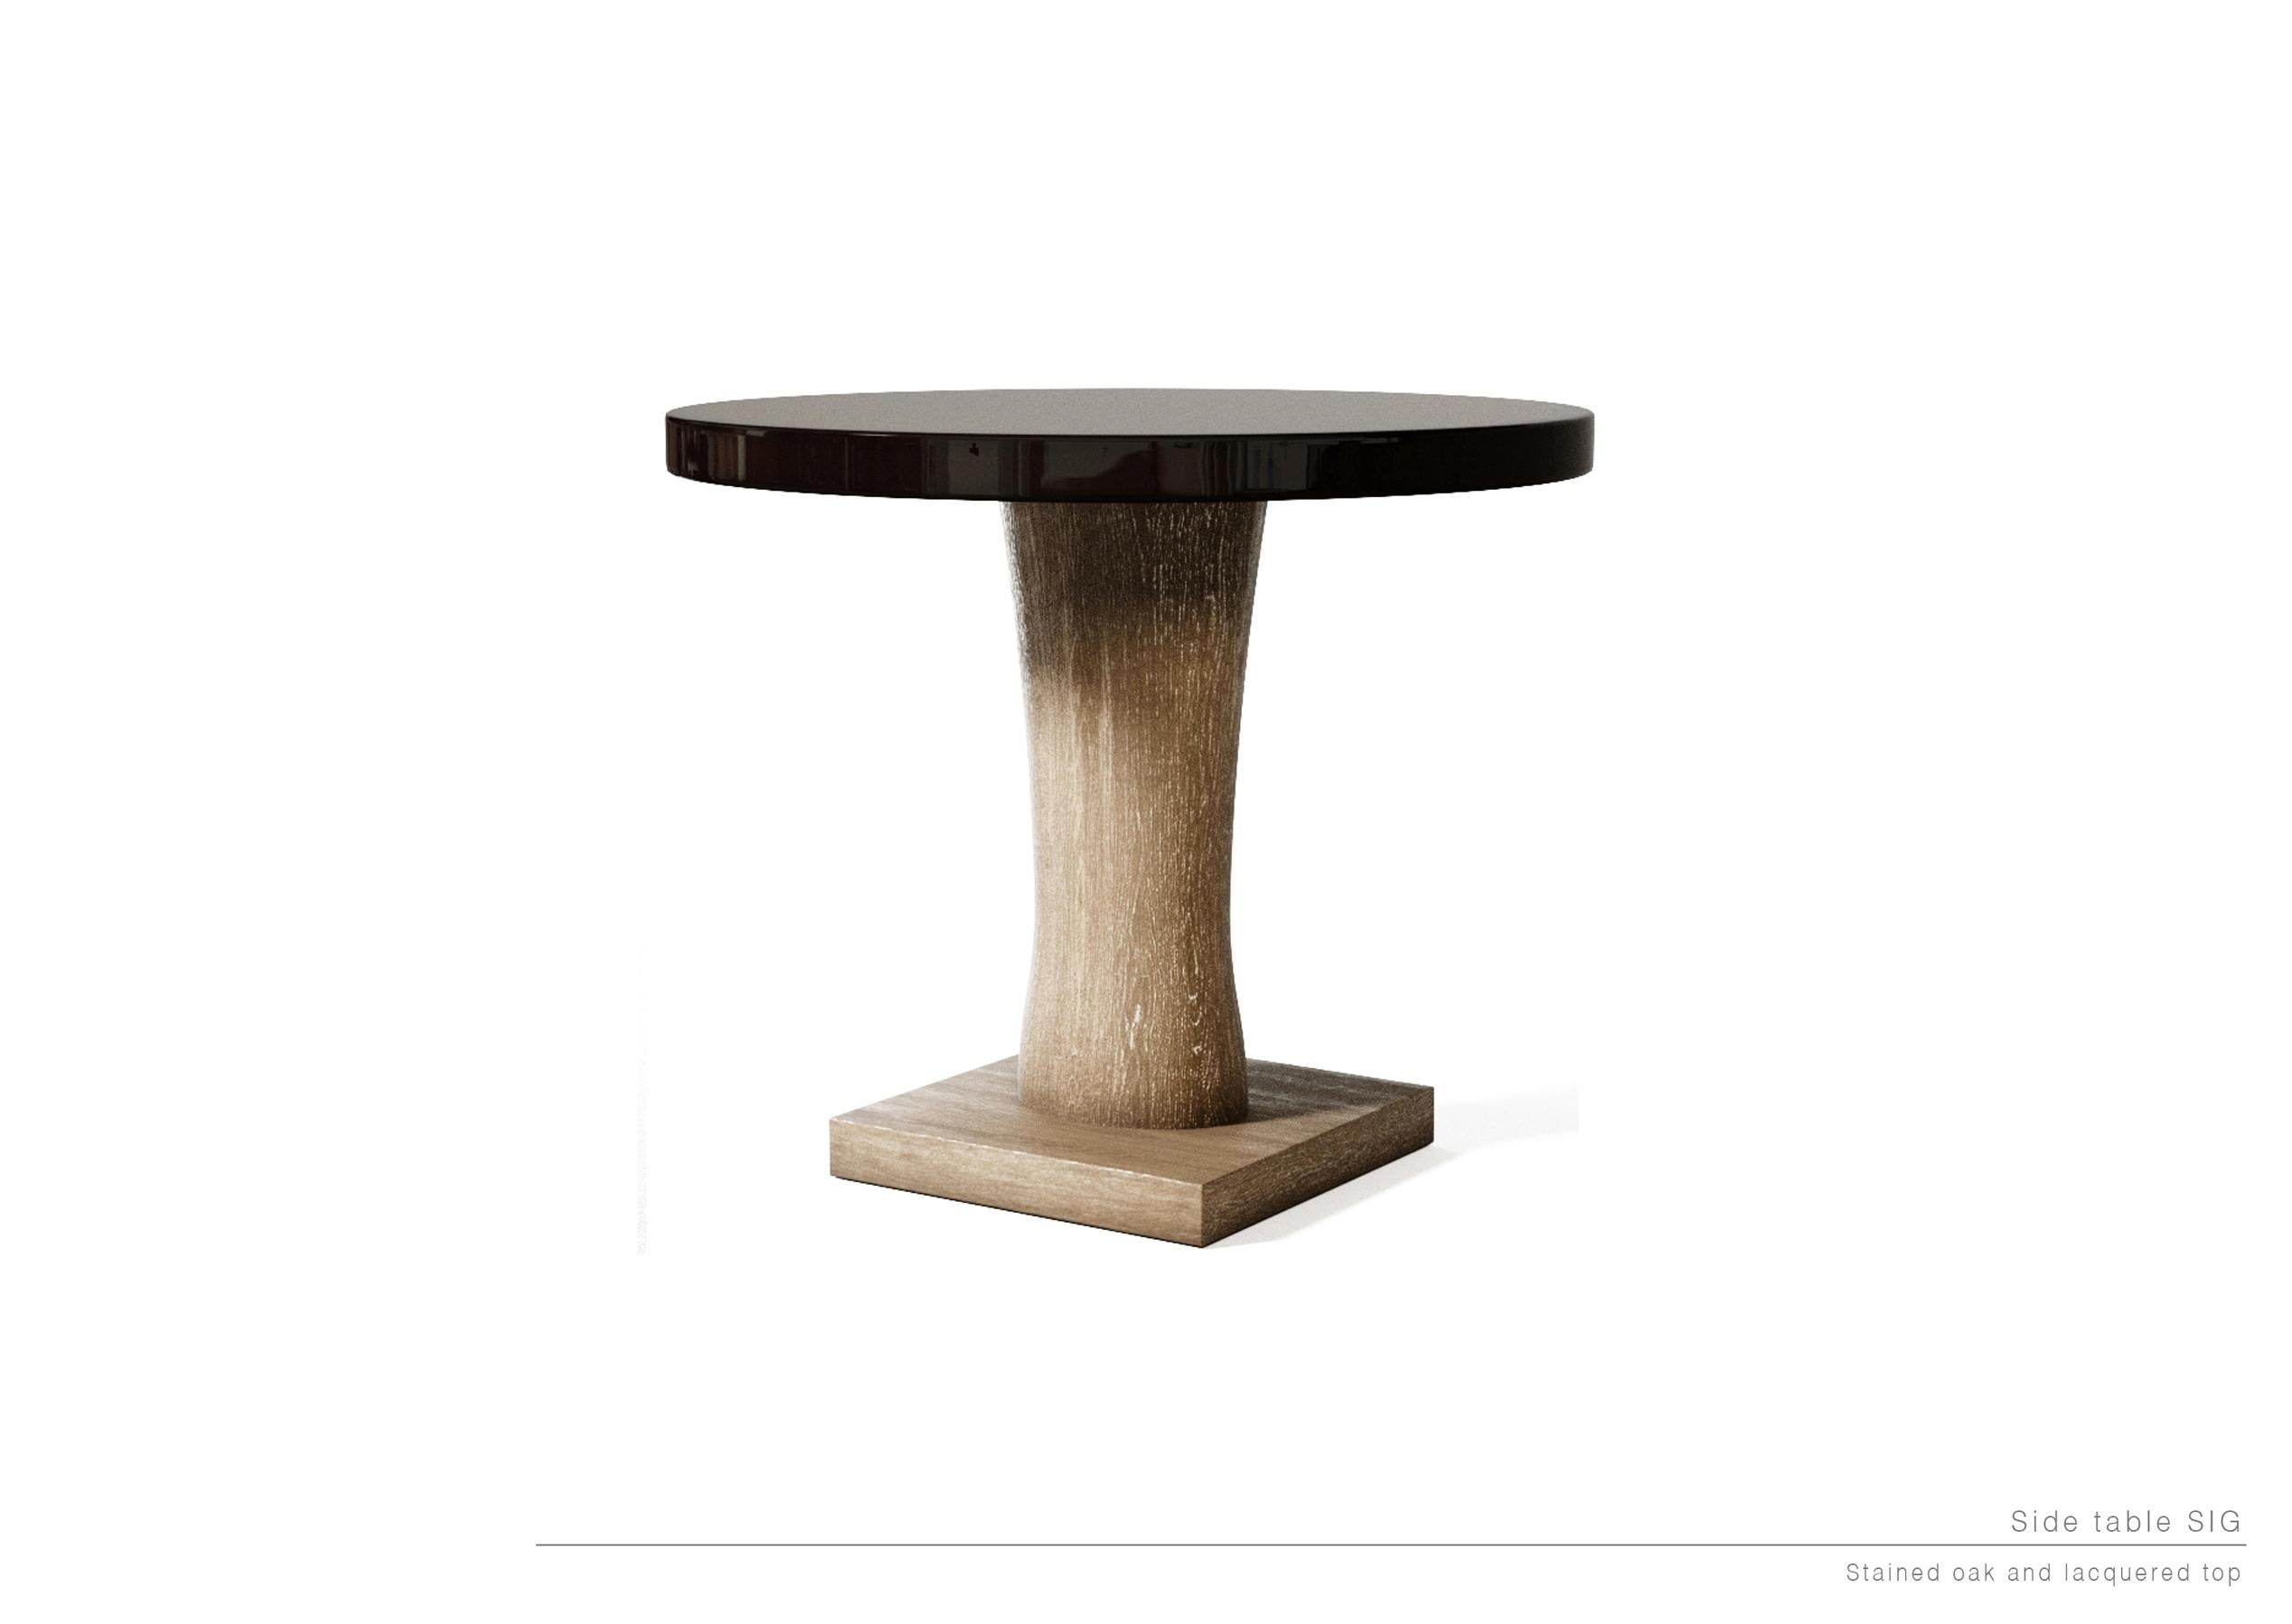 SIG side table by LK Edition.
Limited edition. 
Dimensions: Diameter 85 x height 65 cm 
Materials: Natural brushed oak, lacquer top.

It is with the sense of detail and requirement, this research of the exception by the selection of noble